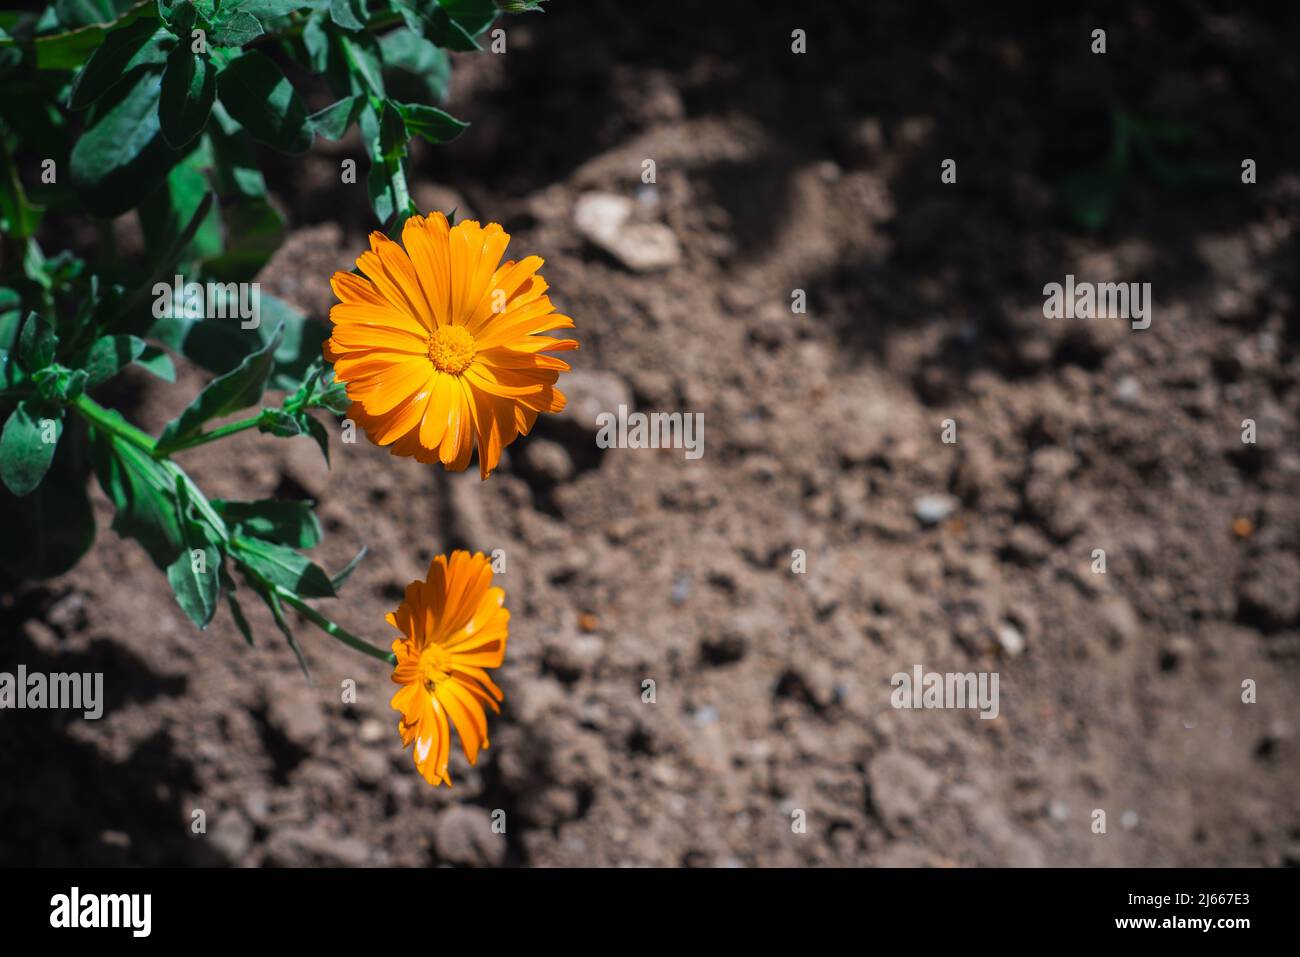 Calendula officinalis with orange petals blossom. Pot marigold flowers with warm yellow color in the garden Stock Photo